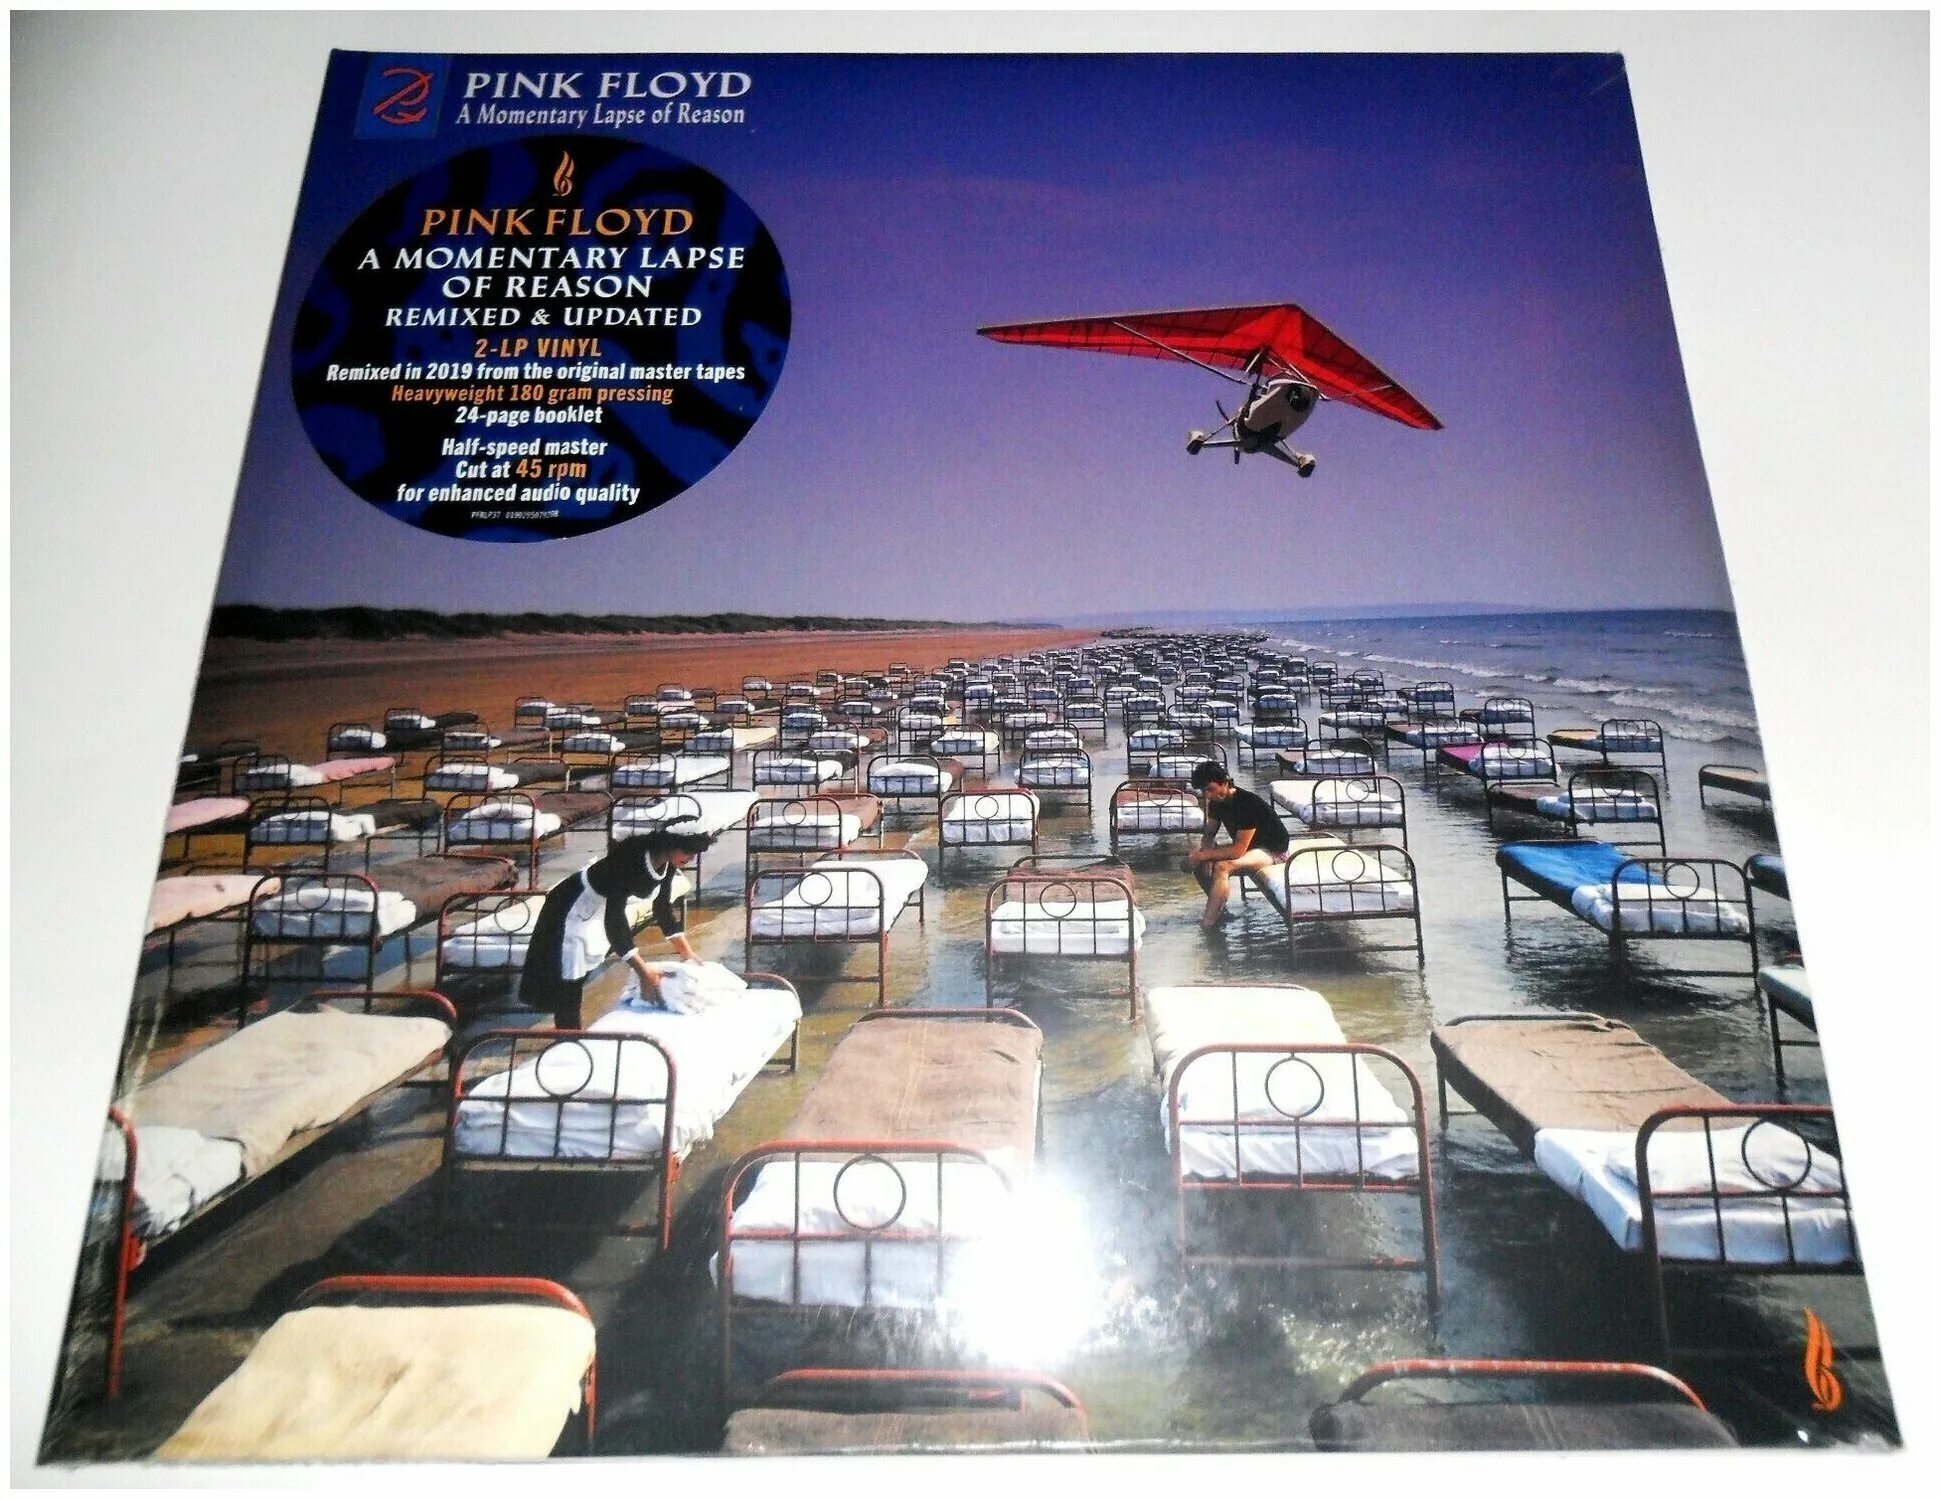 Momentary lapse of reasoning. Pink Floyd a Momentary lapse of reason 2021. Пинк Флойд a Momentary lapse of reason пластинка. Пинк Флойд a Momentary lapse Remixed. Pink Floyd - a Momentary lapse of reason (Remixed and updated).